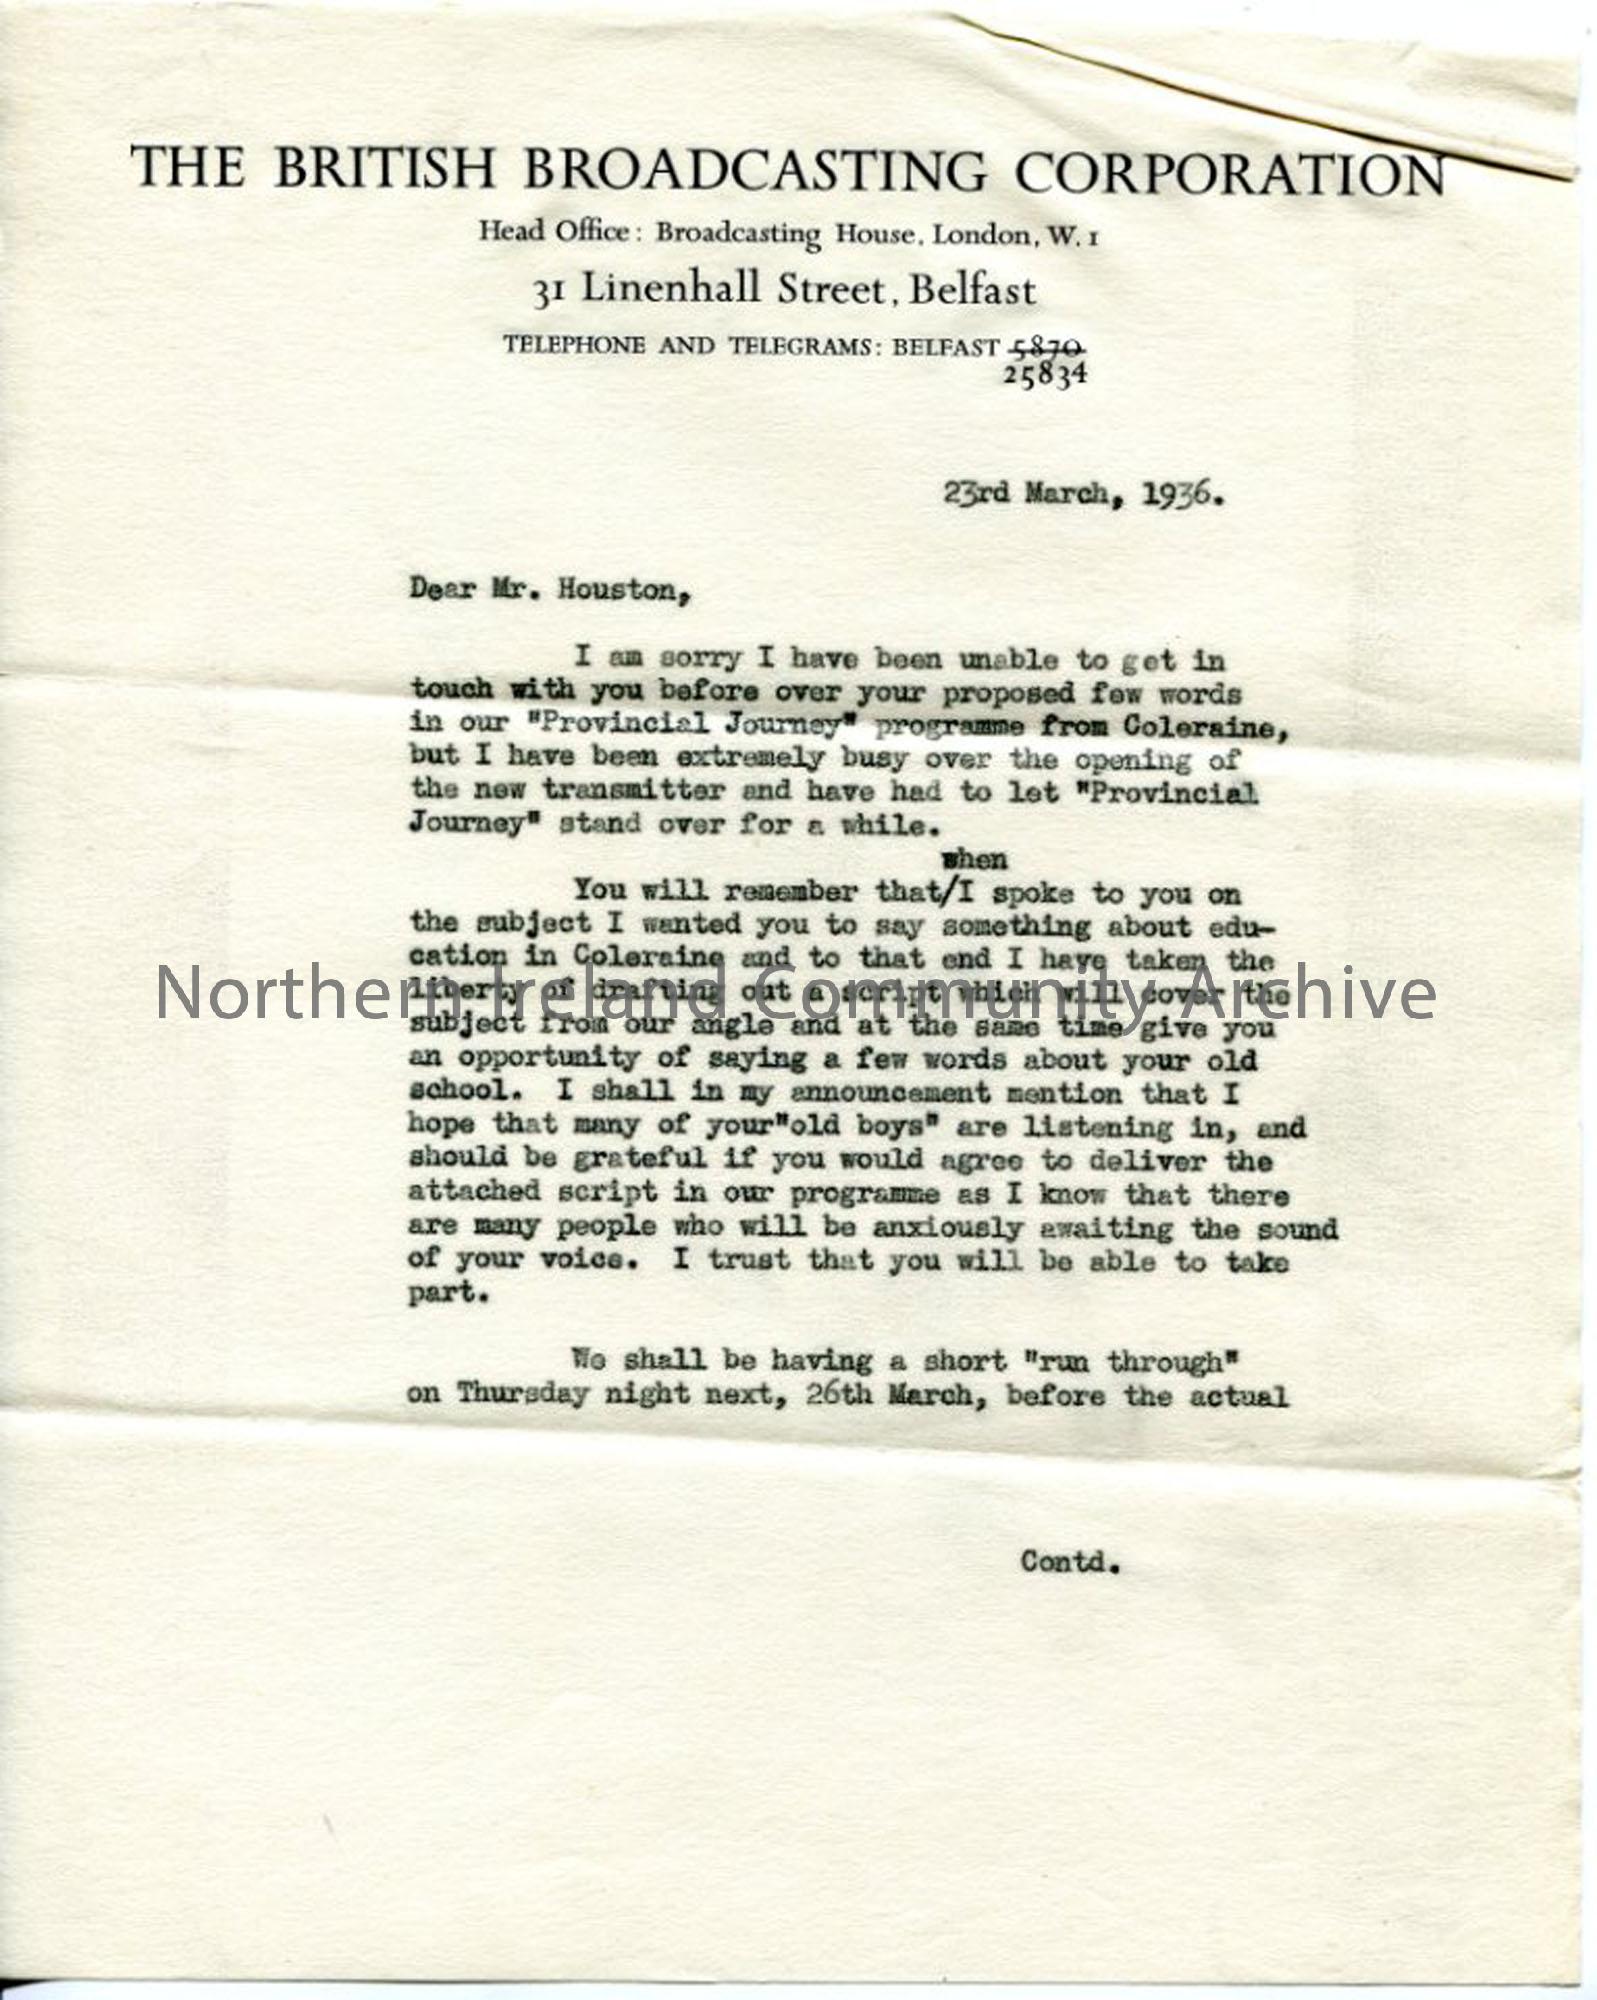 Page 1 of 2 : Letter to Mr T. G. Houston from the BBC, dated 23.3.1936